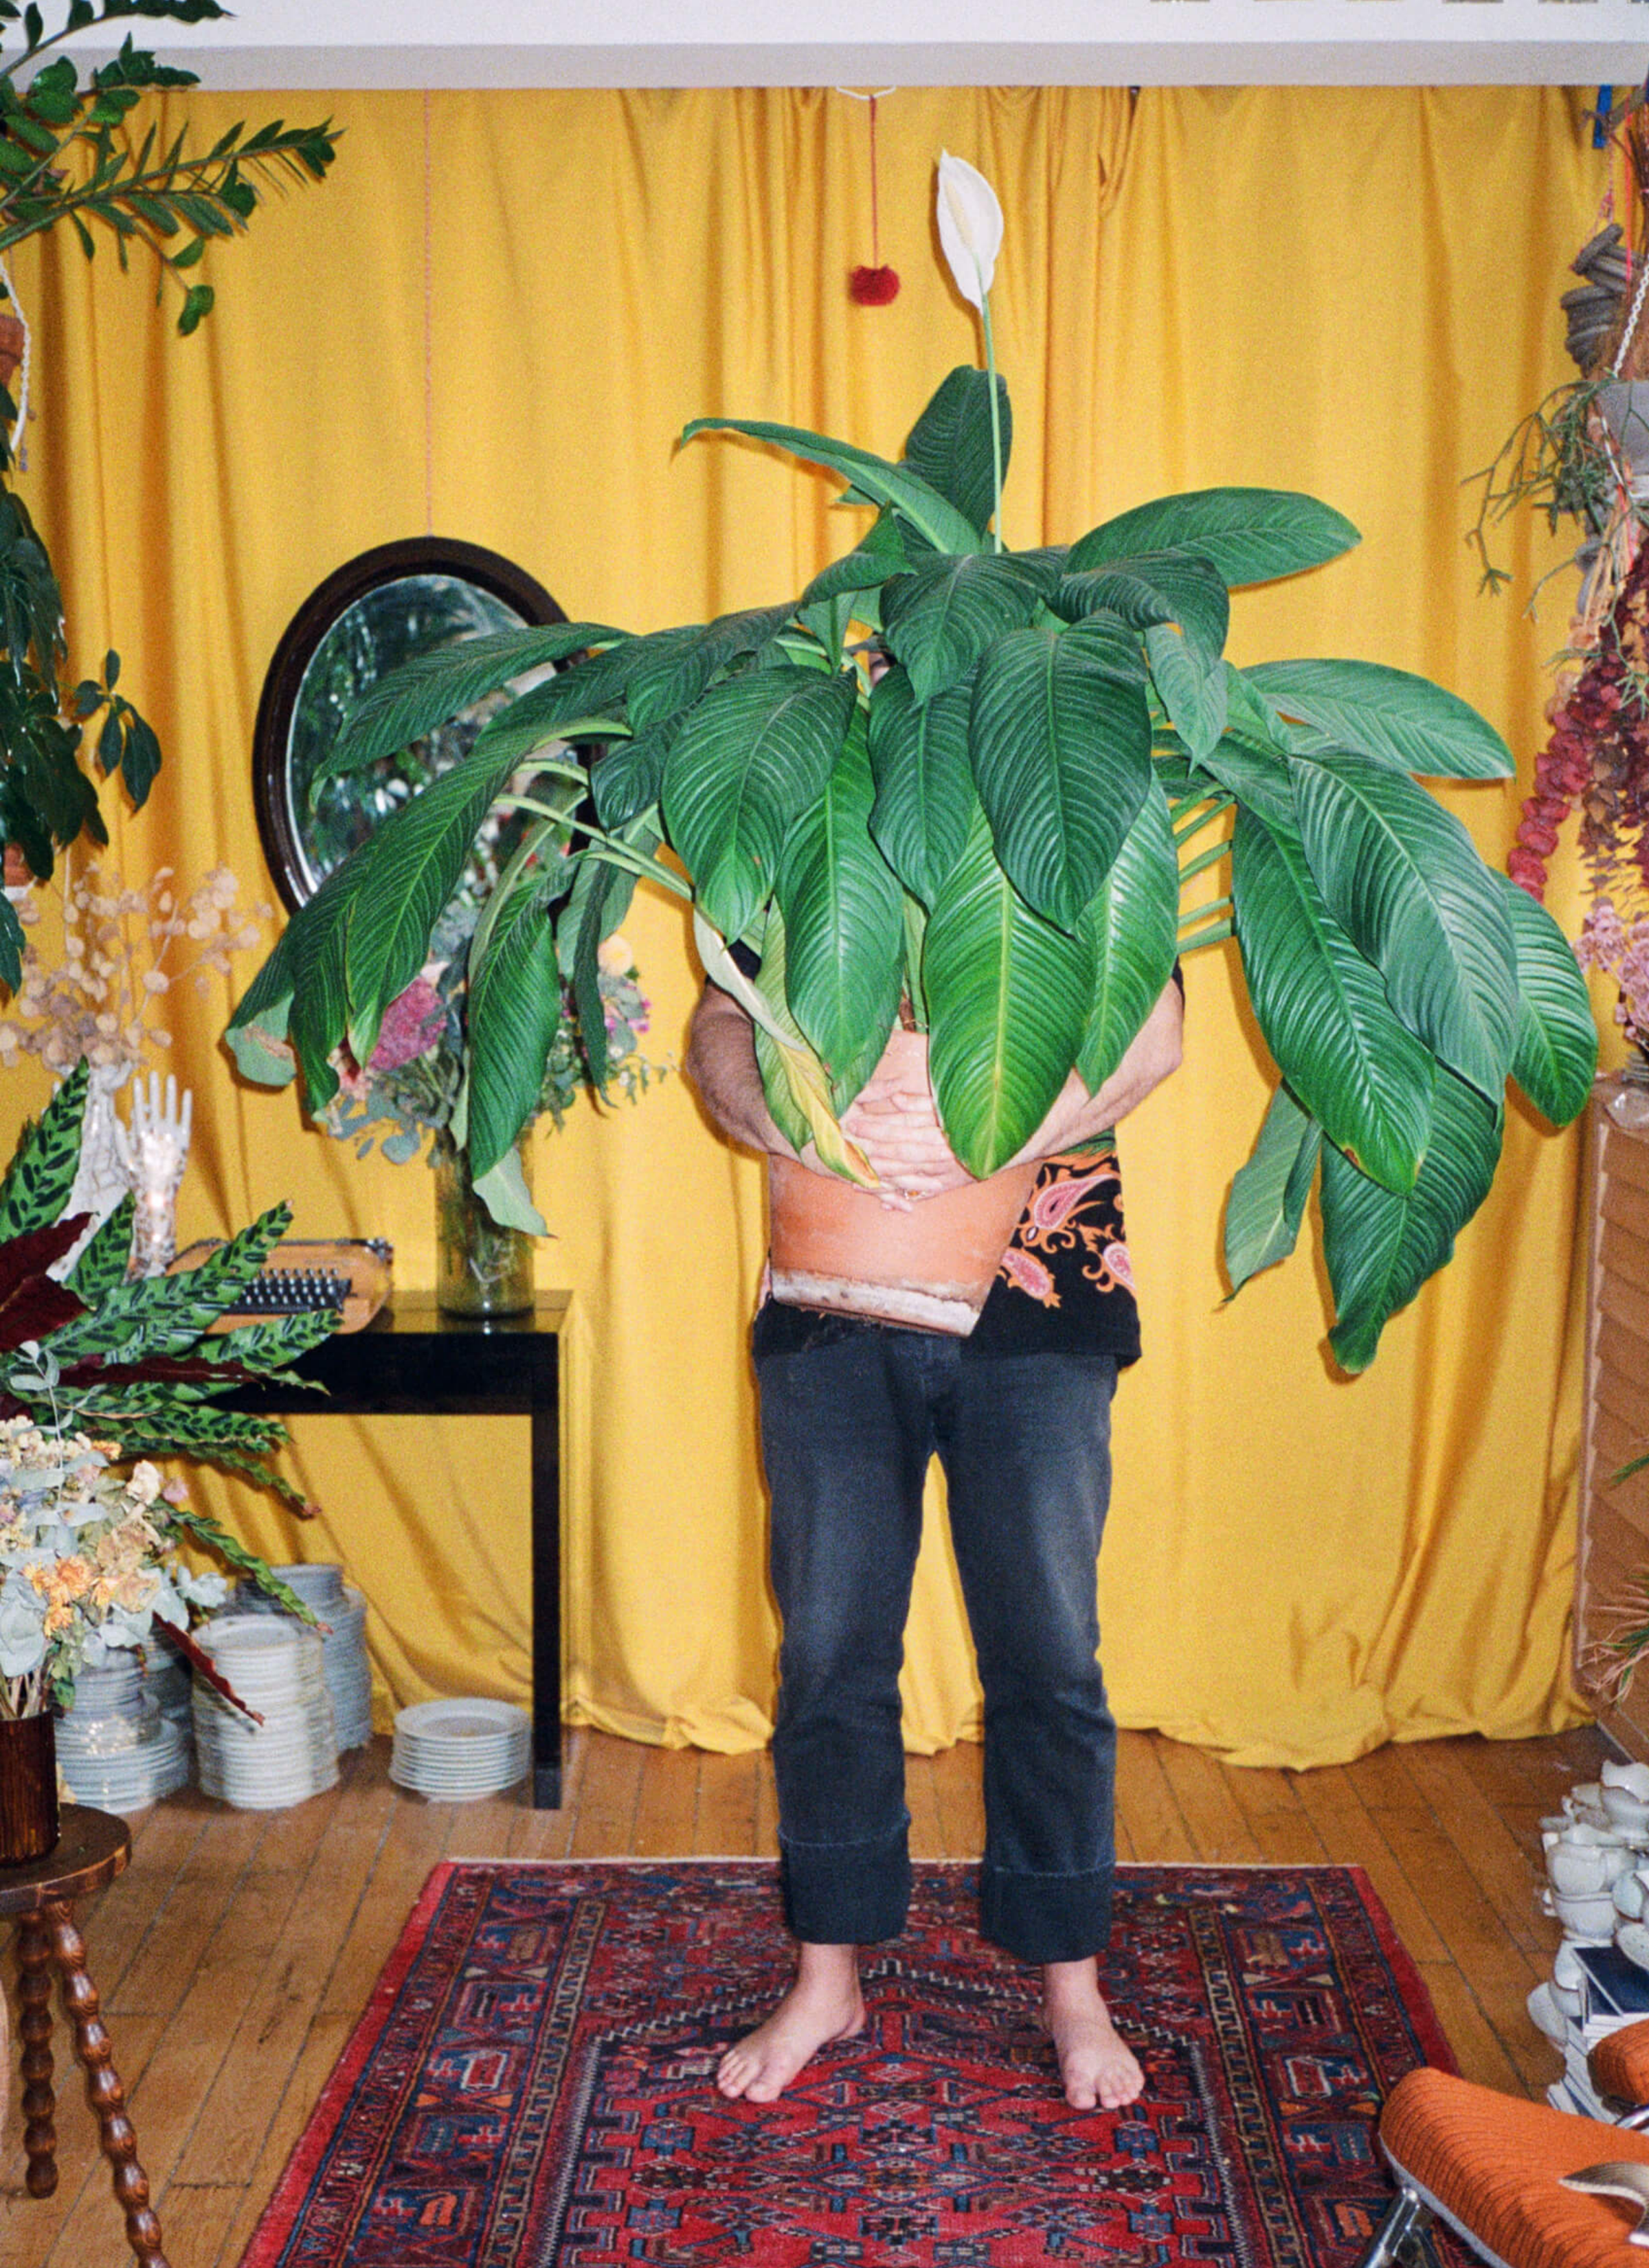 Arnold held a big potted peace lily in front of him, while standing on a carpet on the floor with yellow curtains in the background.